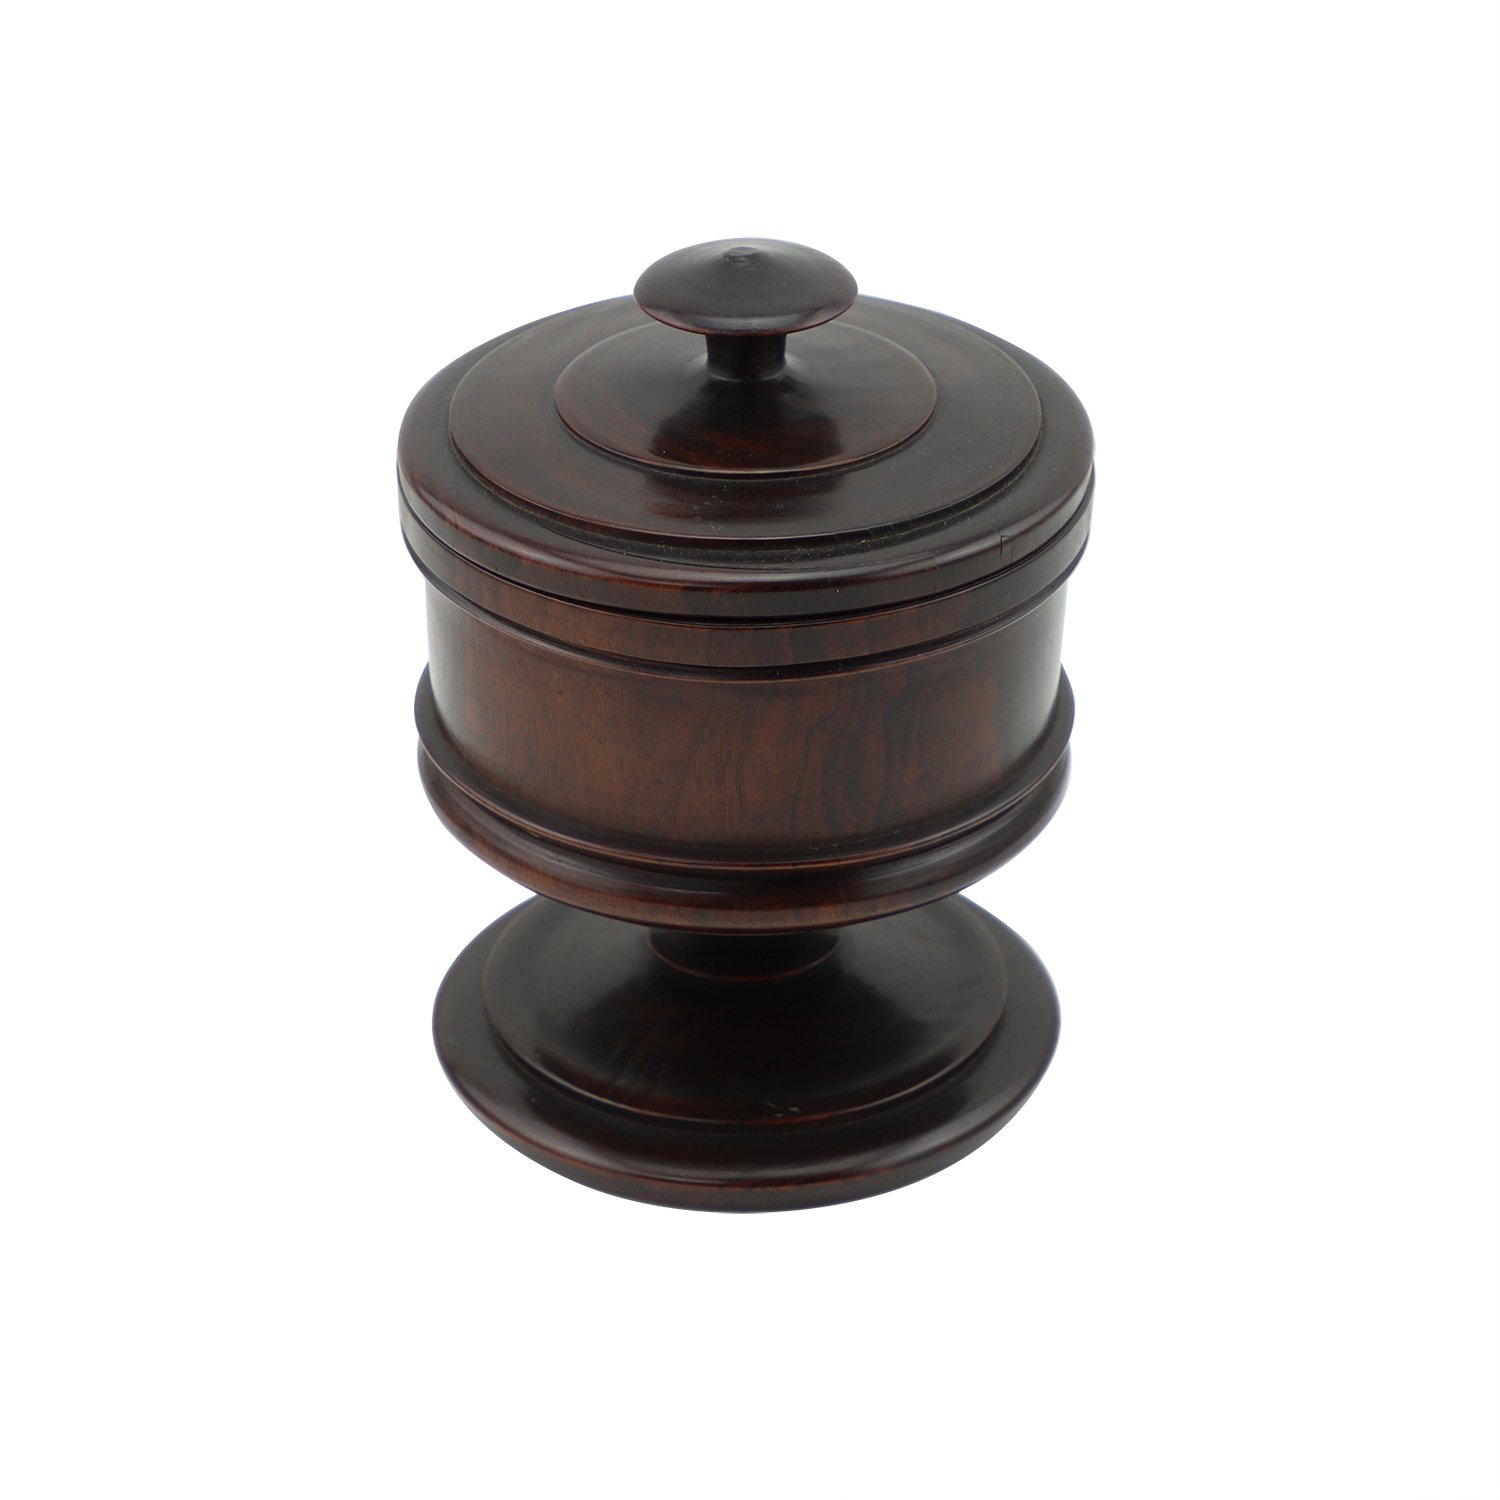 Lignum Vitae Turned Canister, Early 19th Century